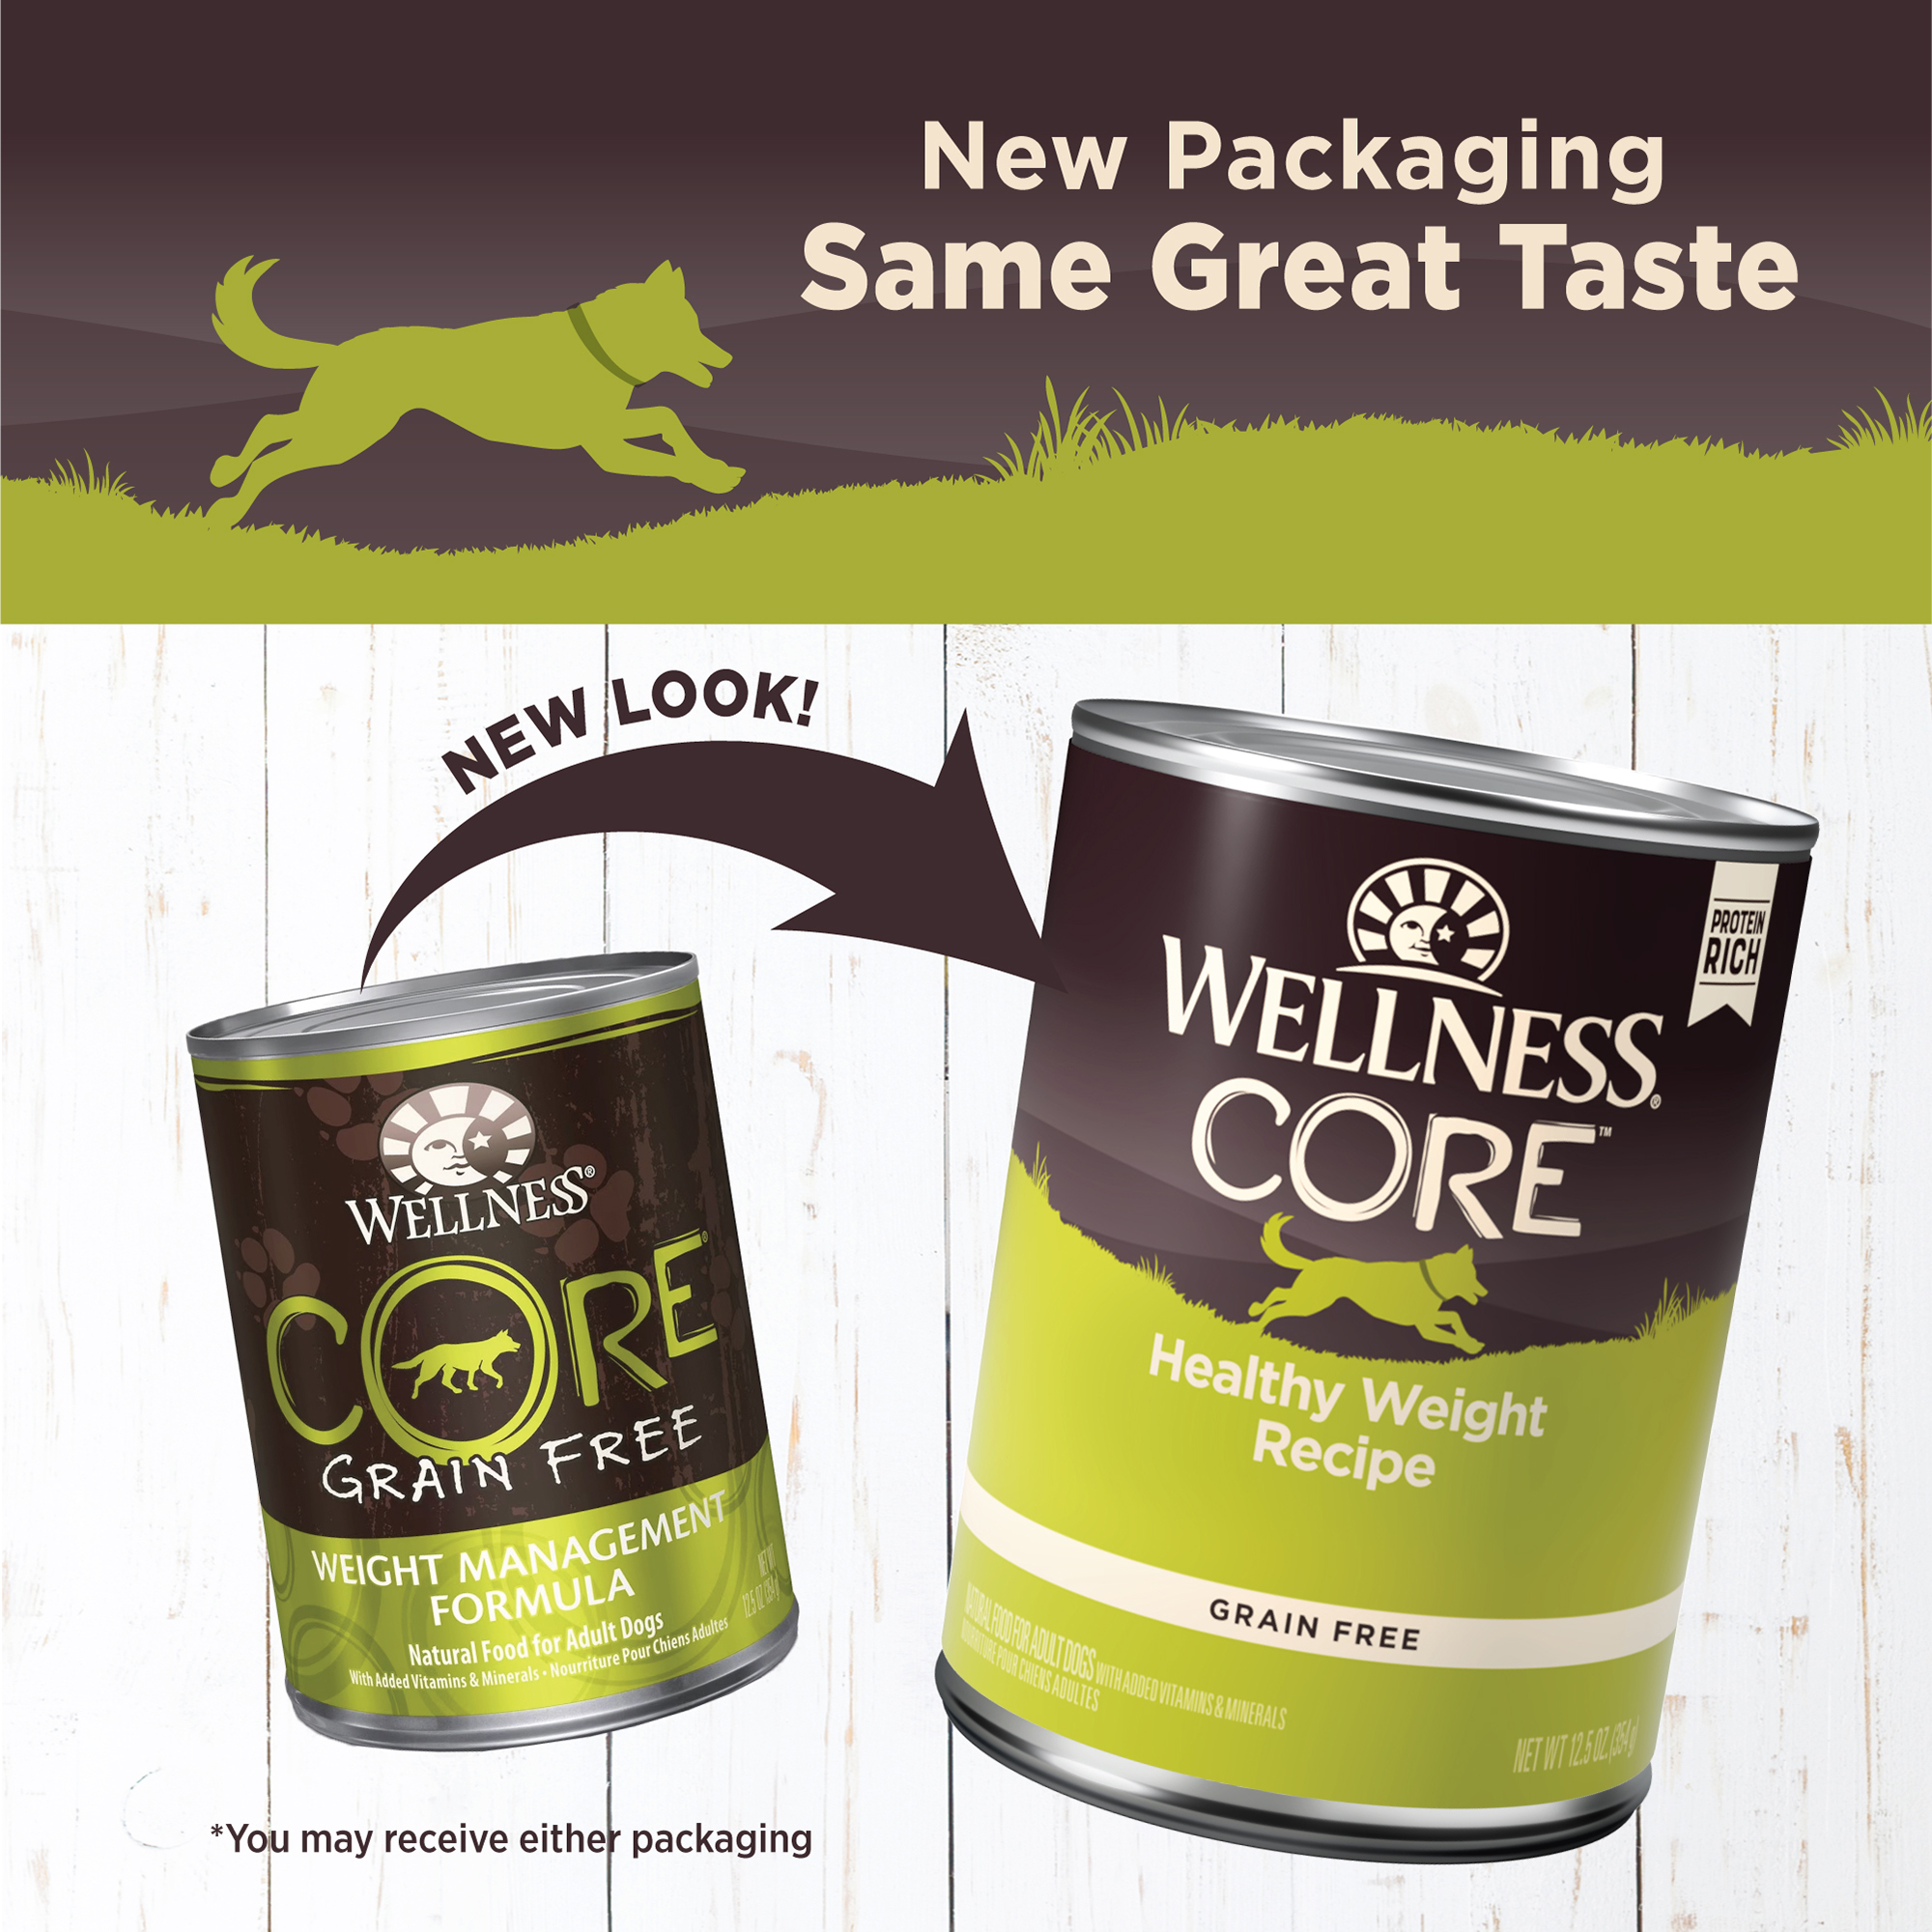 Wellness CORE Natural Wet Grain Free Canned Weight Management Dog Food, 12.5-Ounce Can (Pack of 12) - image 3 of 7